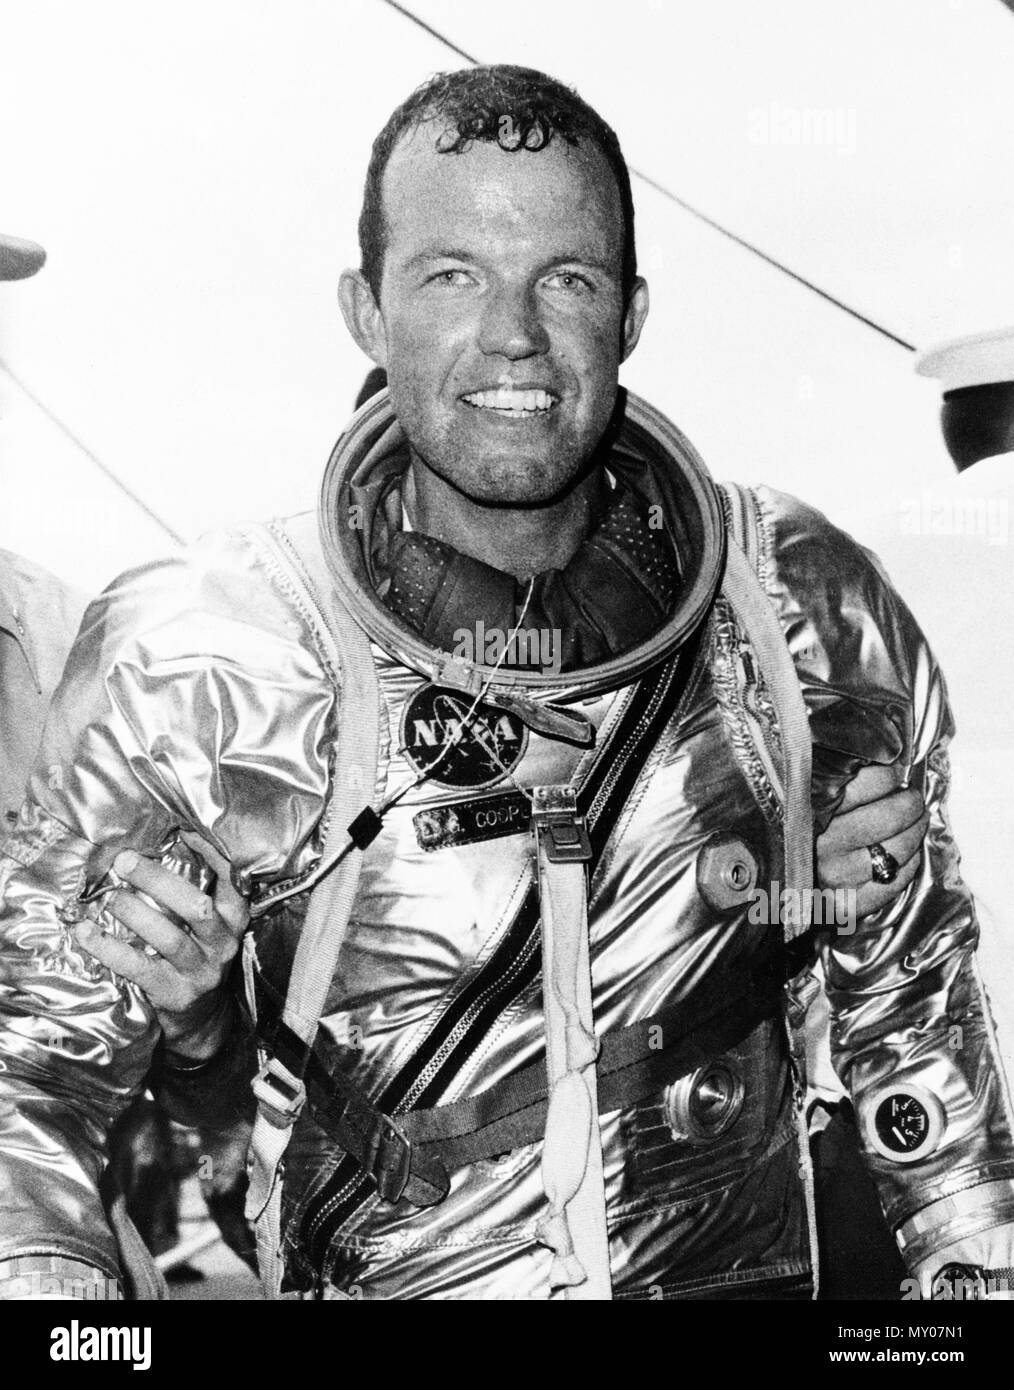 (16 May 1963) --- Astronaut L. Gordon Cooper Jr., pilot of the Mercury-Atlas 9 (MA-9) mission after climbing out of his spacecraft Faith 7 after a 600,000-mile journey. Stock Photo